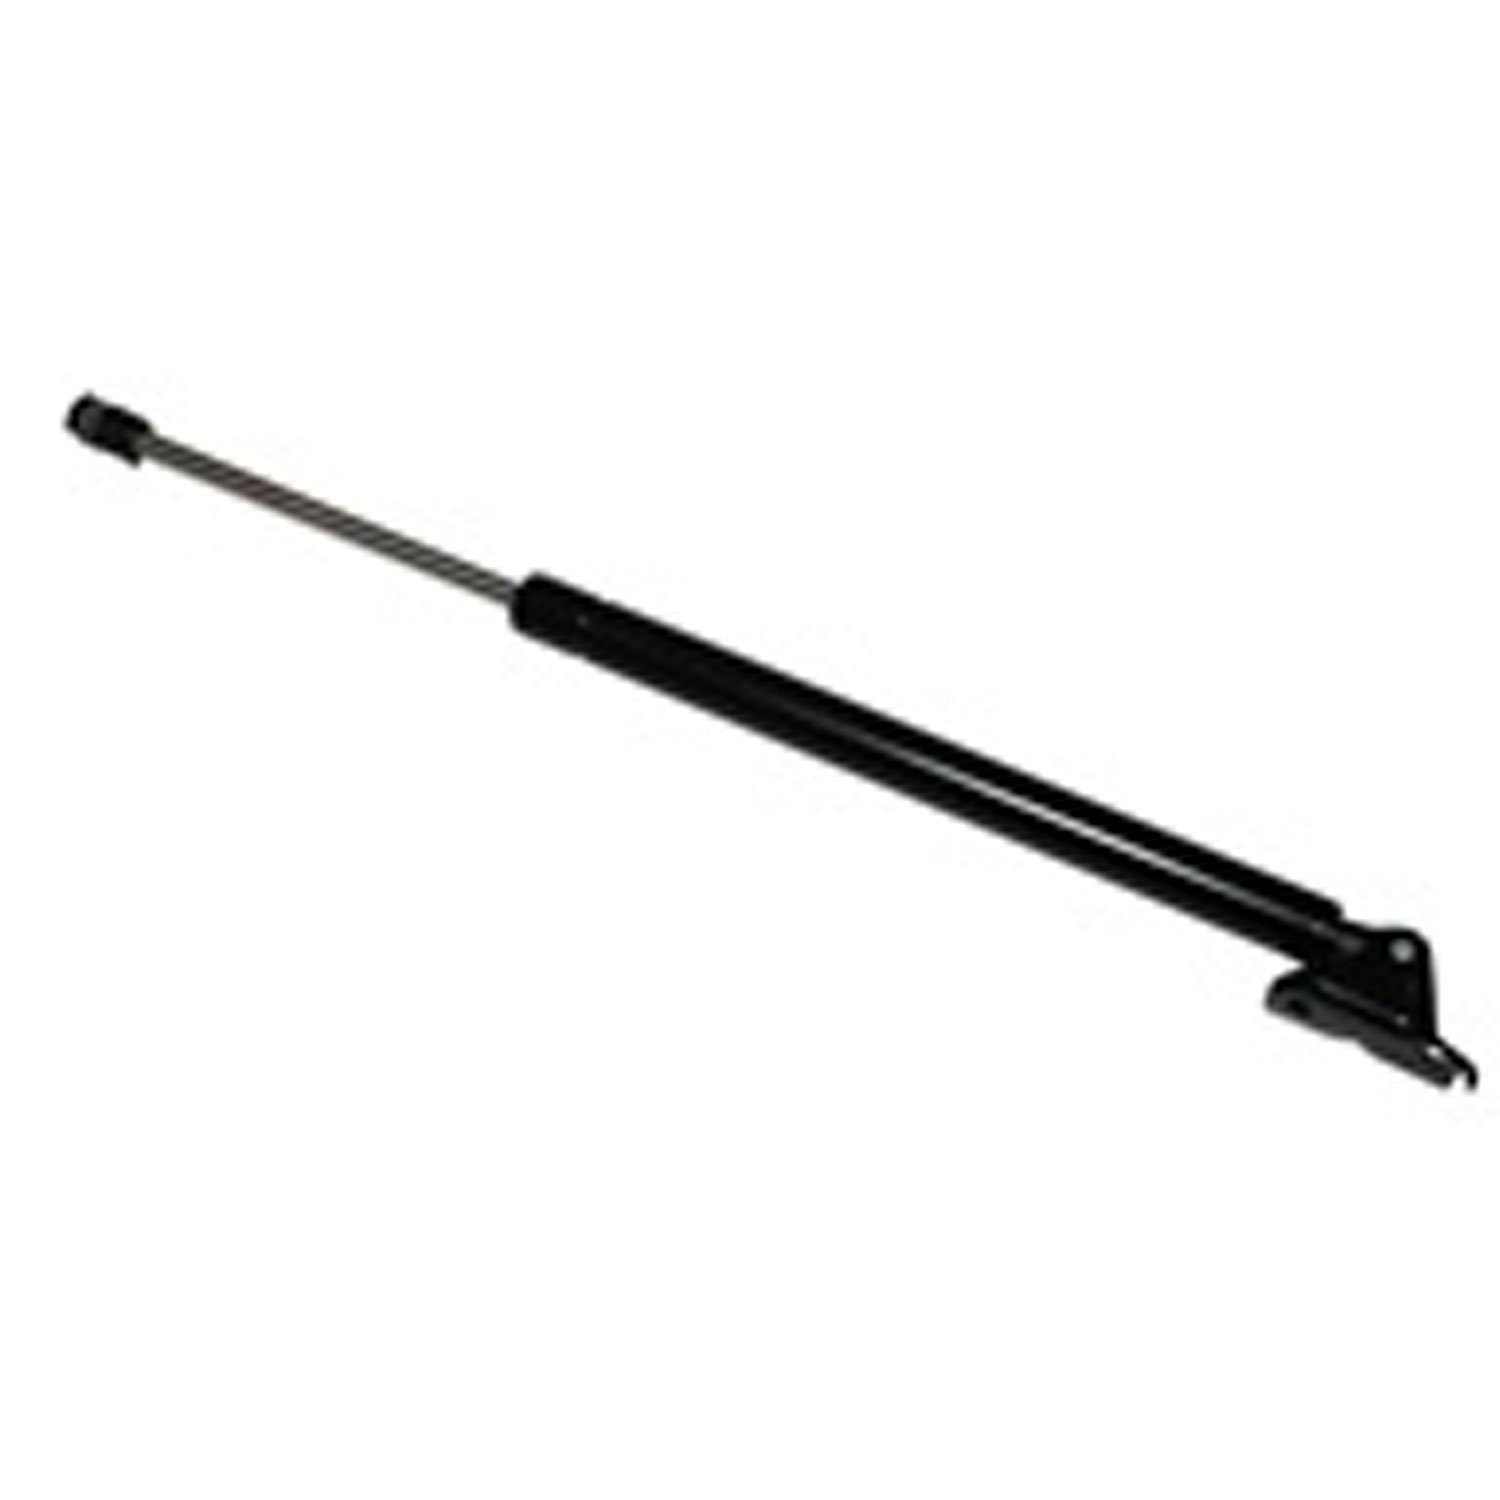 Replacement gas strut from Omix-ADA, Fits liftgate on 93-98 Jeep Grand Cherokee ZJ Right side.